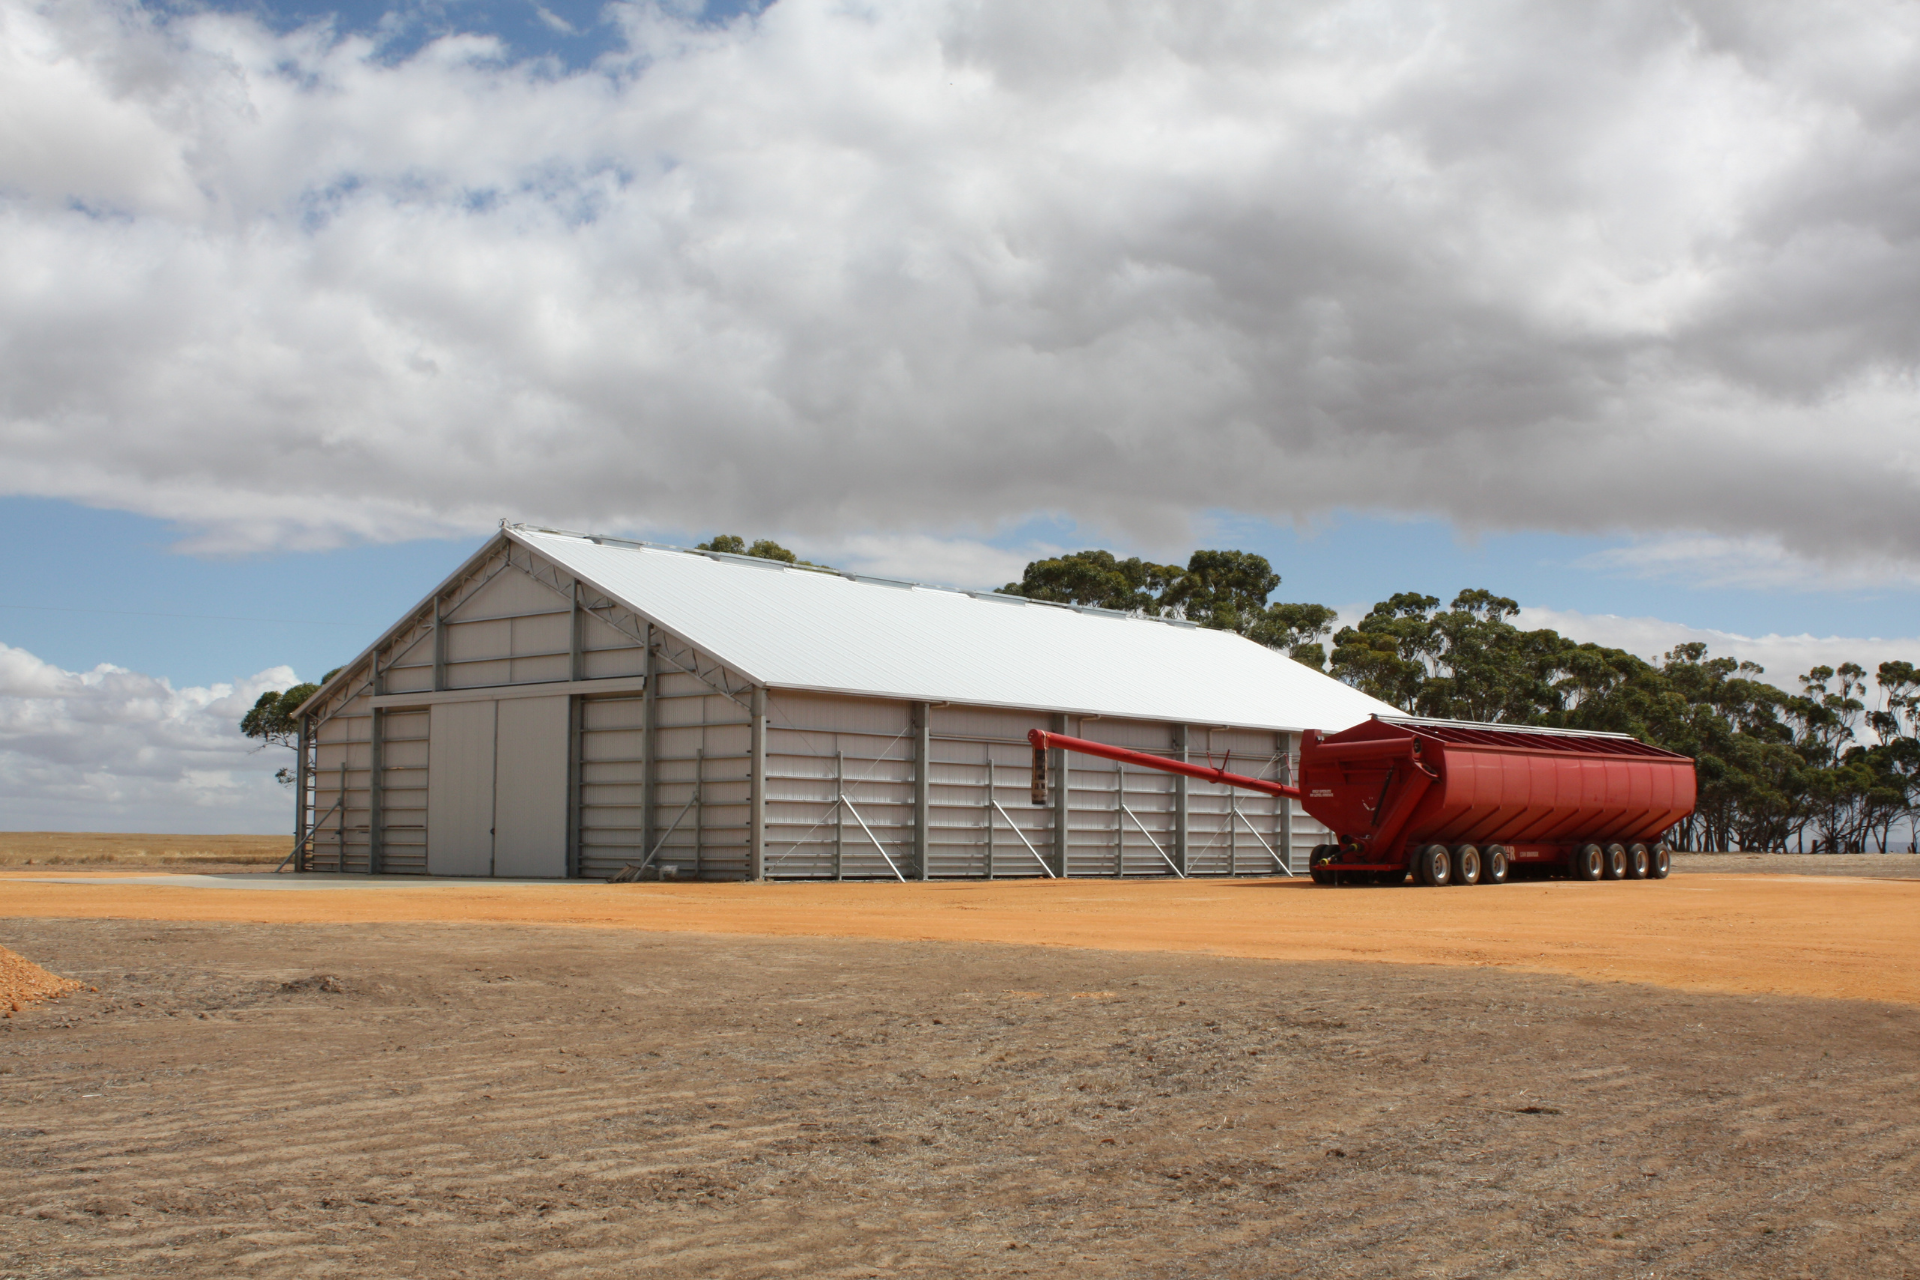 A 37m x 21m x 5m inside-out grain shed at Maroona VIC